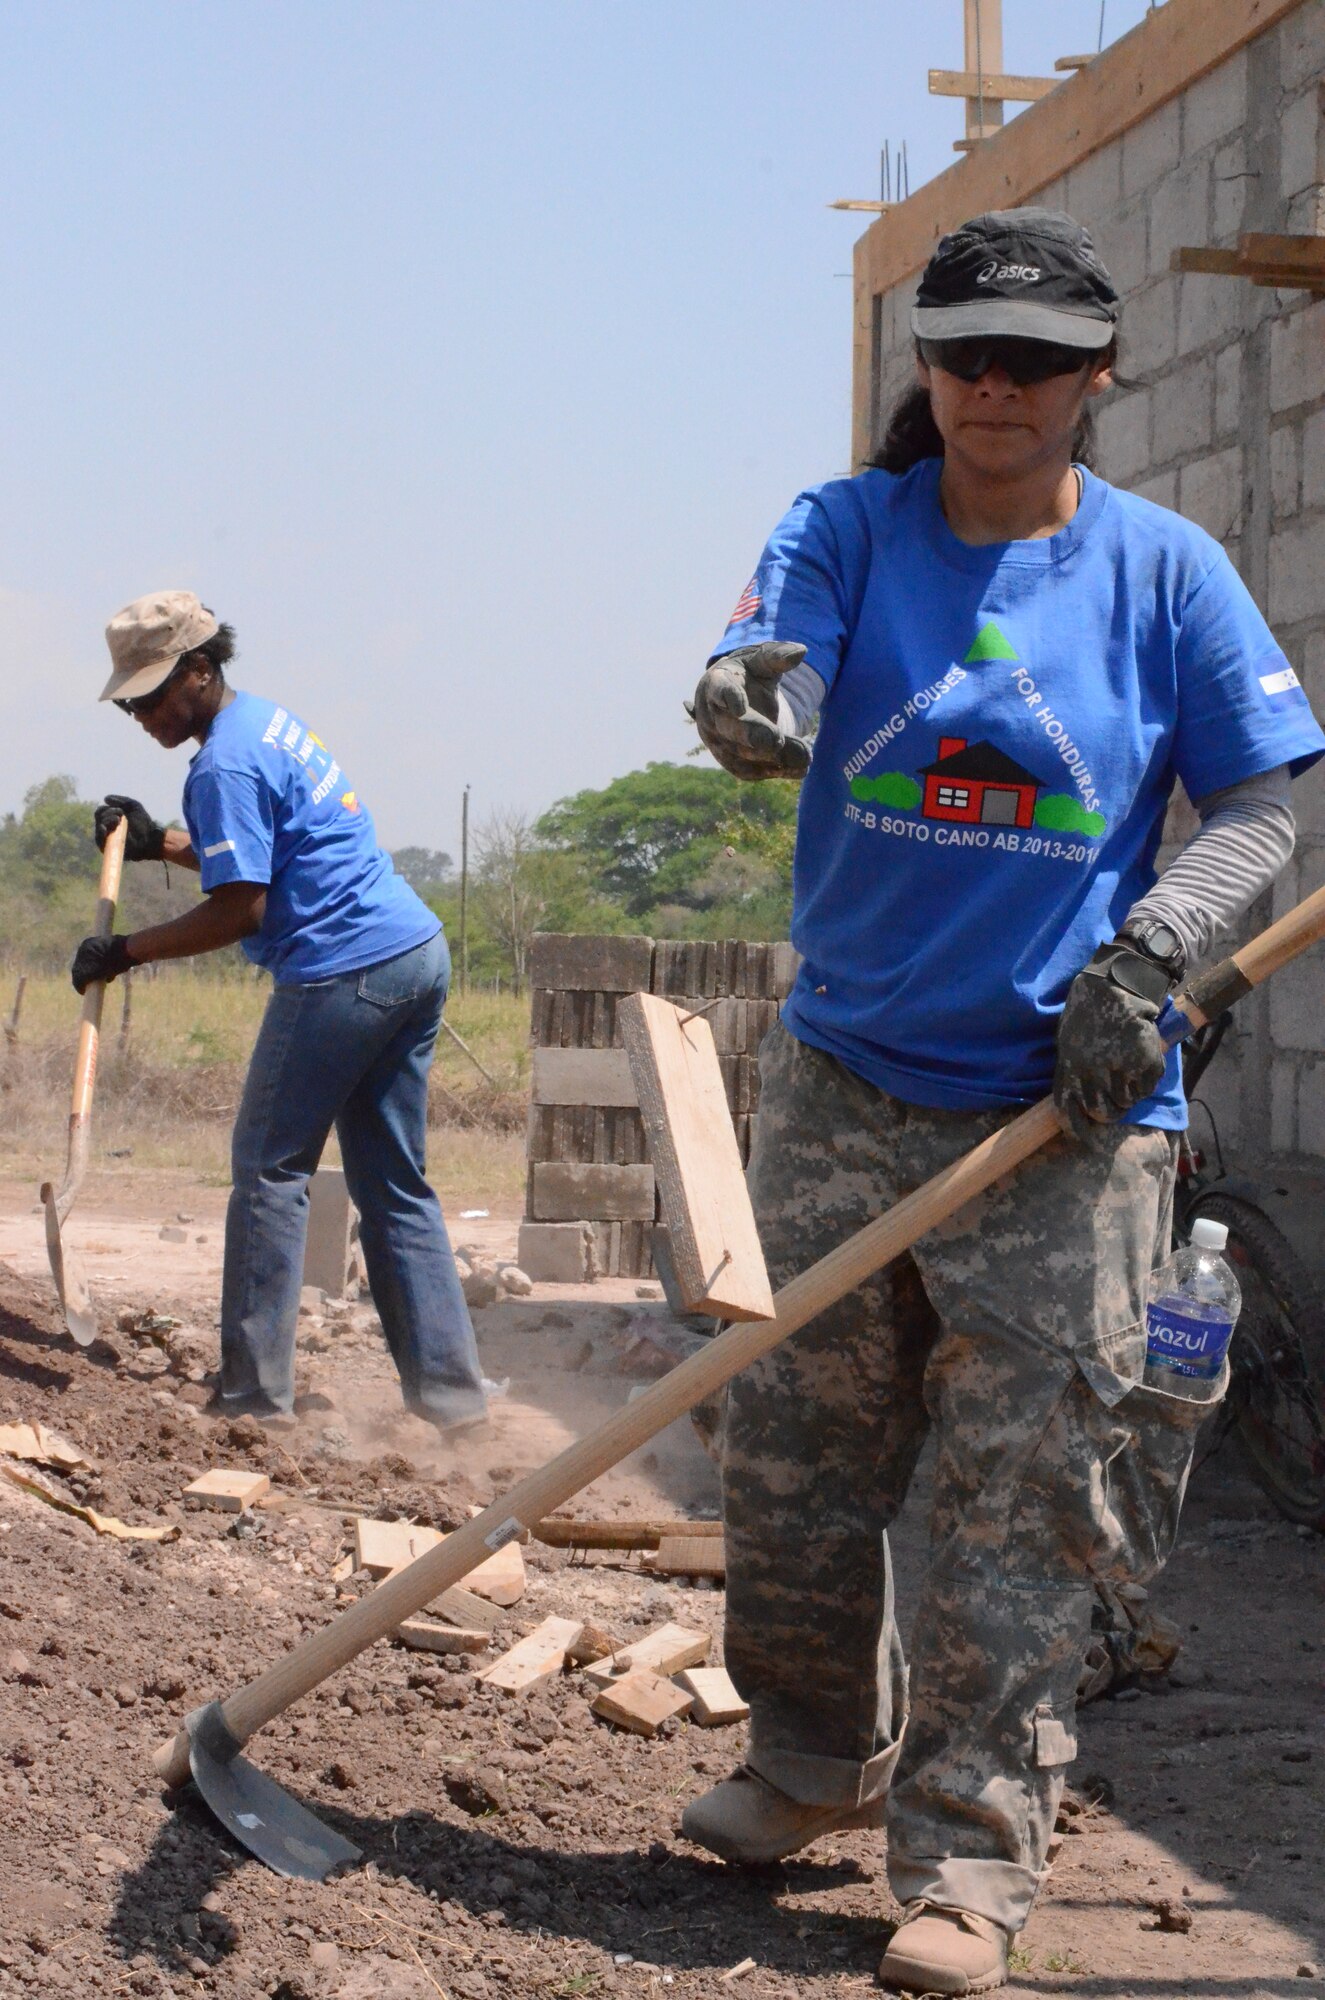 Twenty-one Joint Task Force-Bravo service members filled trenches, leveled ground and shoveled dirt at the Ajuterique Housing Project helping several Honduran families get closer to moving into their new homes April 5, 2014.  In conjunction with the Honduras Habit for Humanity, Siguatepeque region, the Municipality of Ajuterique and the Civil-Military Operations office at JTF-Bravo, these service members volunteered their labor to assist in the building of homes in the Ajuterique community.  The two-phased project includes building 38 two-bedroom, one-bath homes for low-income Hondurans who can afford to construct a home but doesn't own the land to build on. (Photo by U. S. Air Force Technical Sgt. Breihan Fetz)